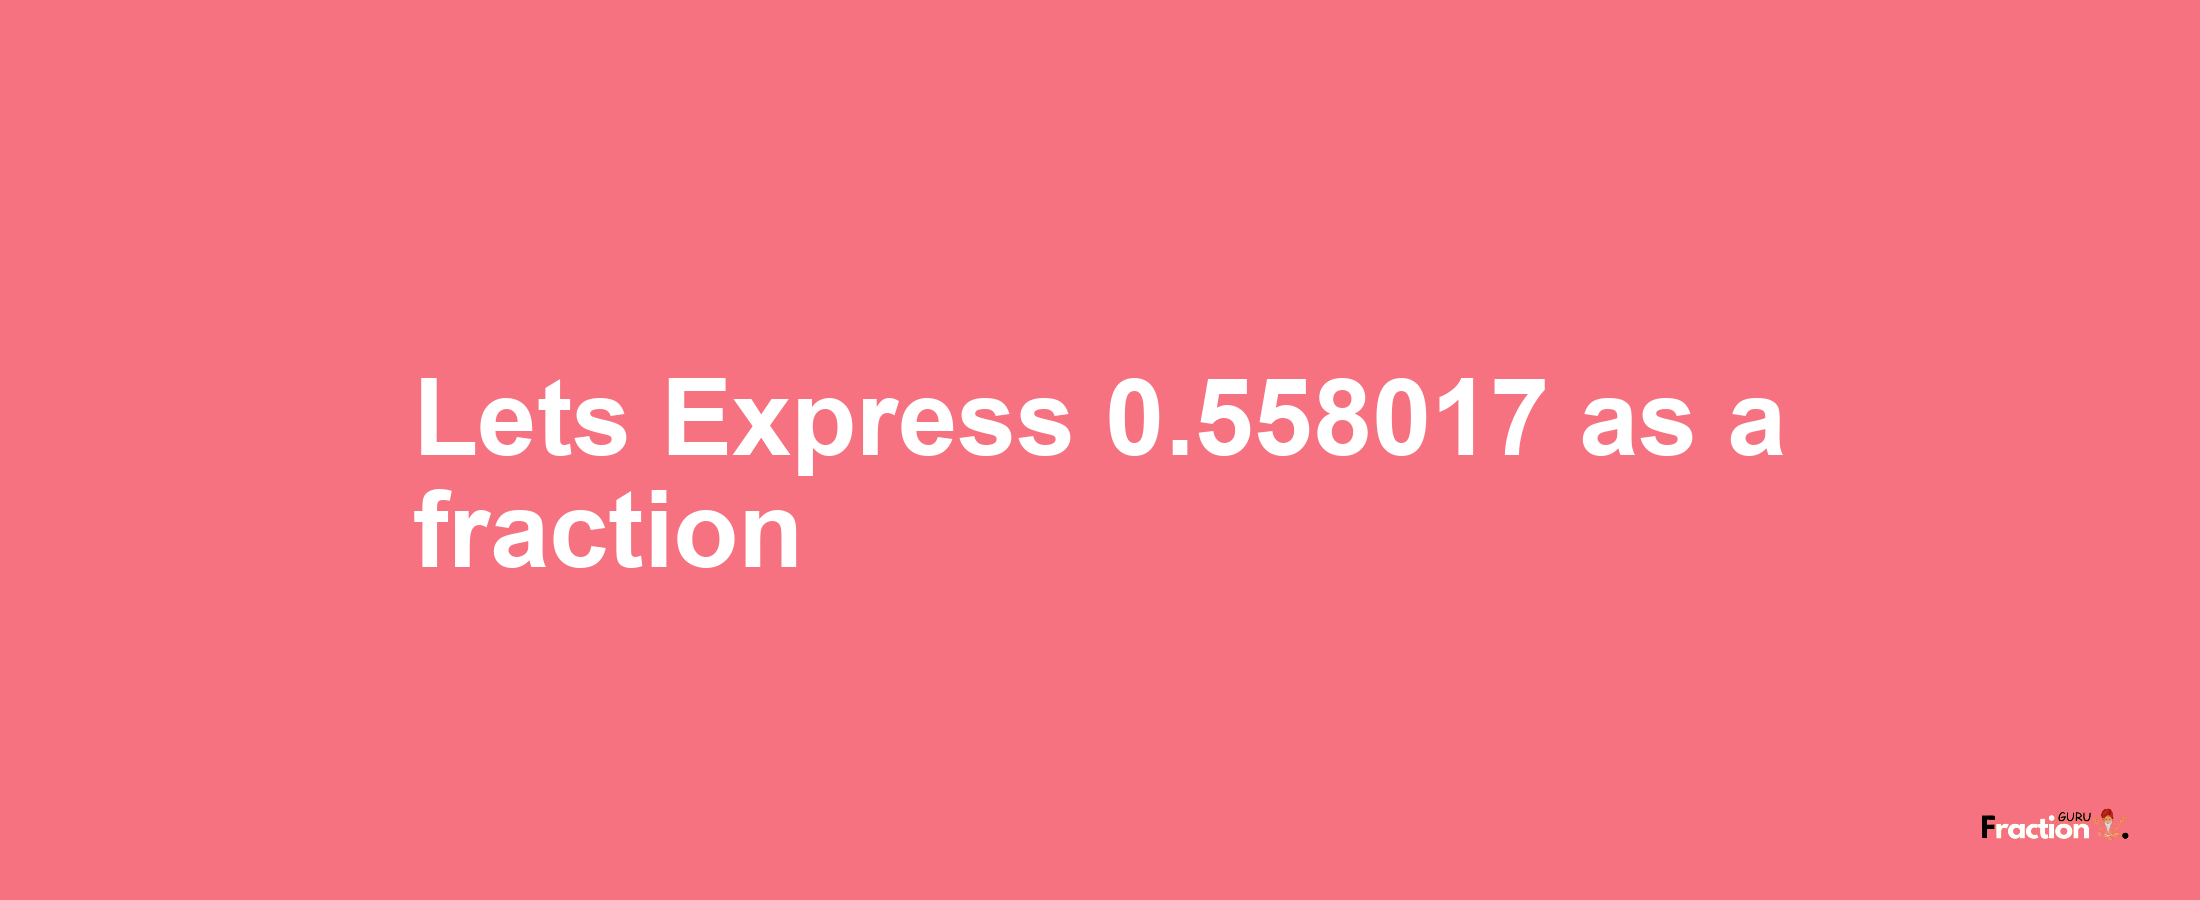 Lets Express 0.558017 as afraction